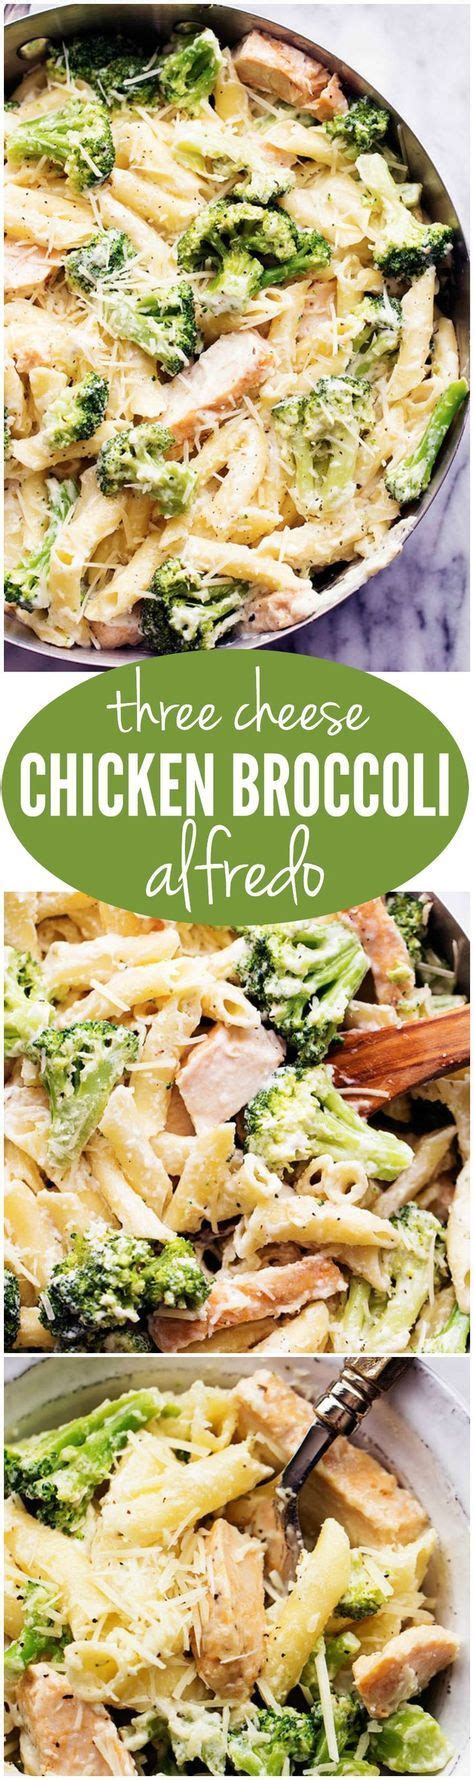 This Three Cheese Chicken Broccoli Alfredo Is One Of The